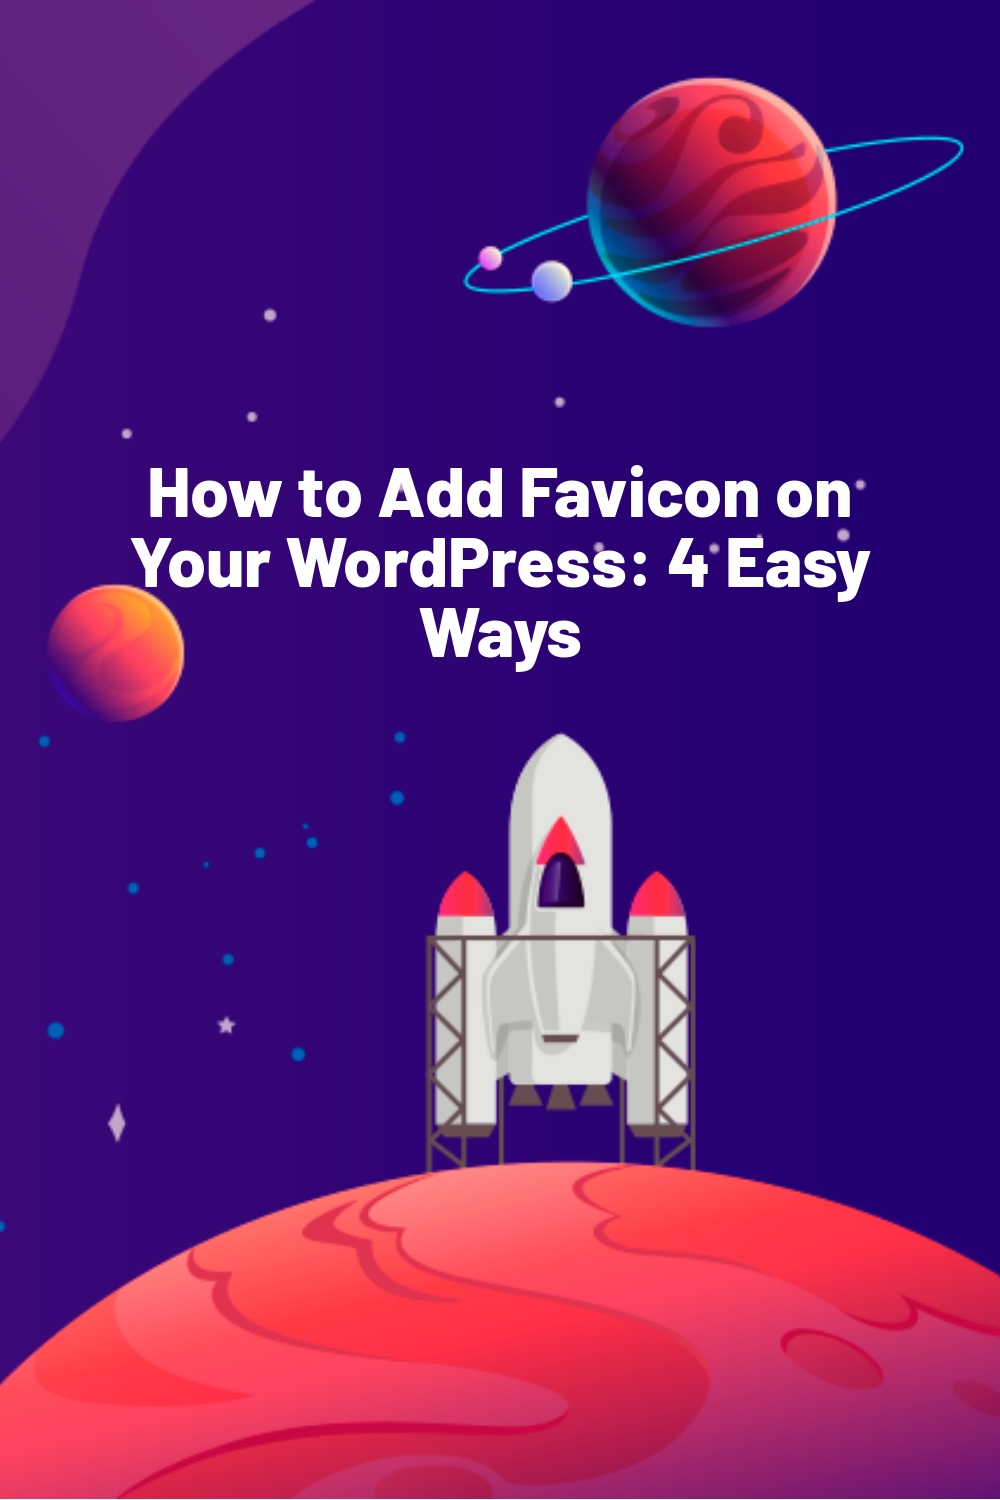 How to Add Favicon on Your WordPress: 4 Easy Ways